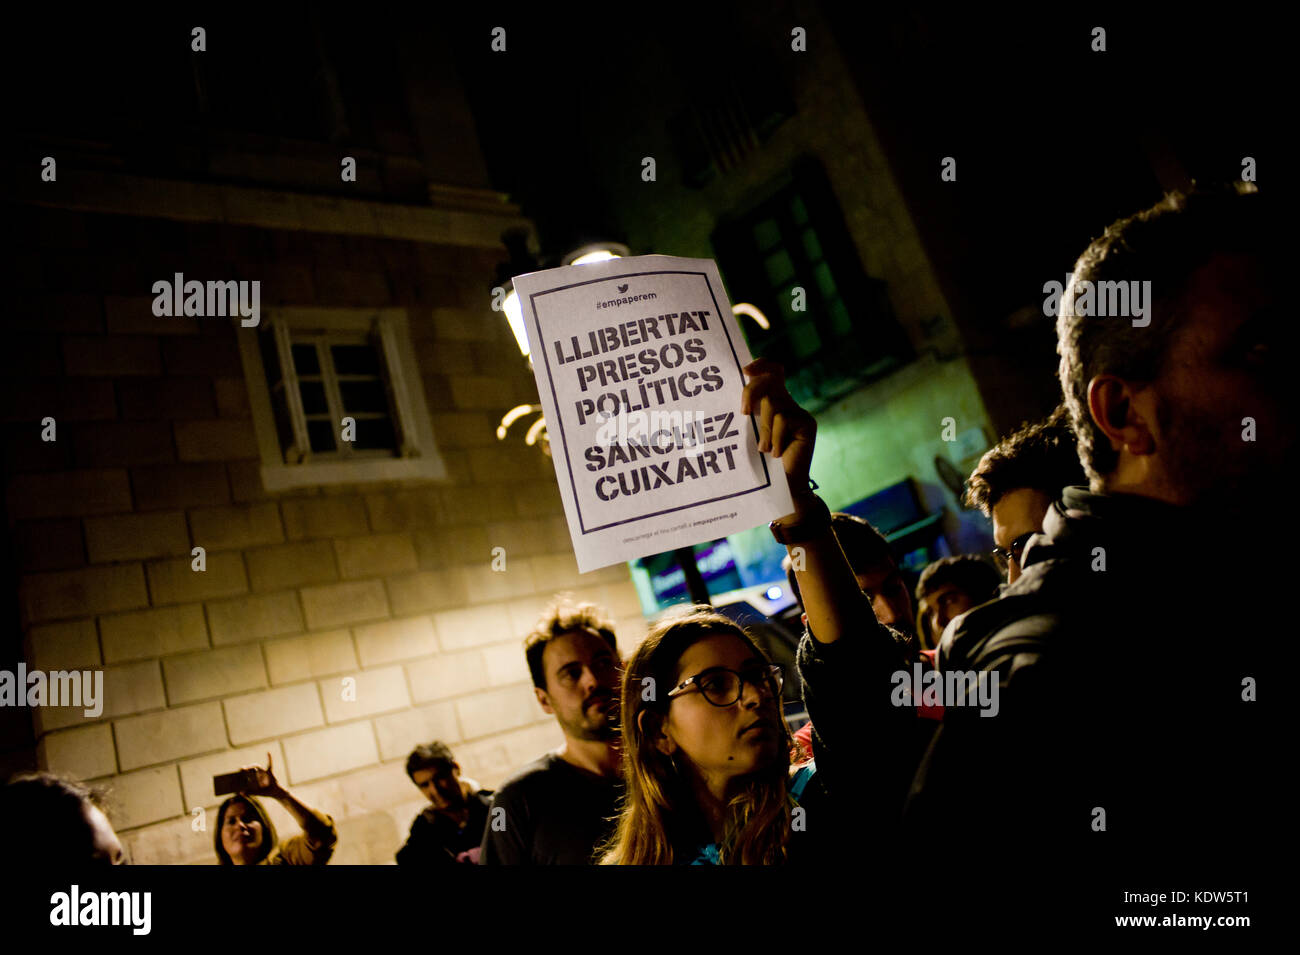 Barcelona, Spain. 16th Oct, 2017. In Barcelona a woman holds a poster reading 'freedom political prisoners Sanchez Cuixart' after Spain's High Court has remanded two leaders of a Catalan separatist organization on suspicion of sedition. The leader of the Catalan National Assembly (ANC), Jordi Sanchez, and Jordi Cuixart of the Omnium Cultural group were jailed on Monday after questioning. Credit: Jordi Boixareu/Alamy Live News Stock Photo